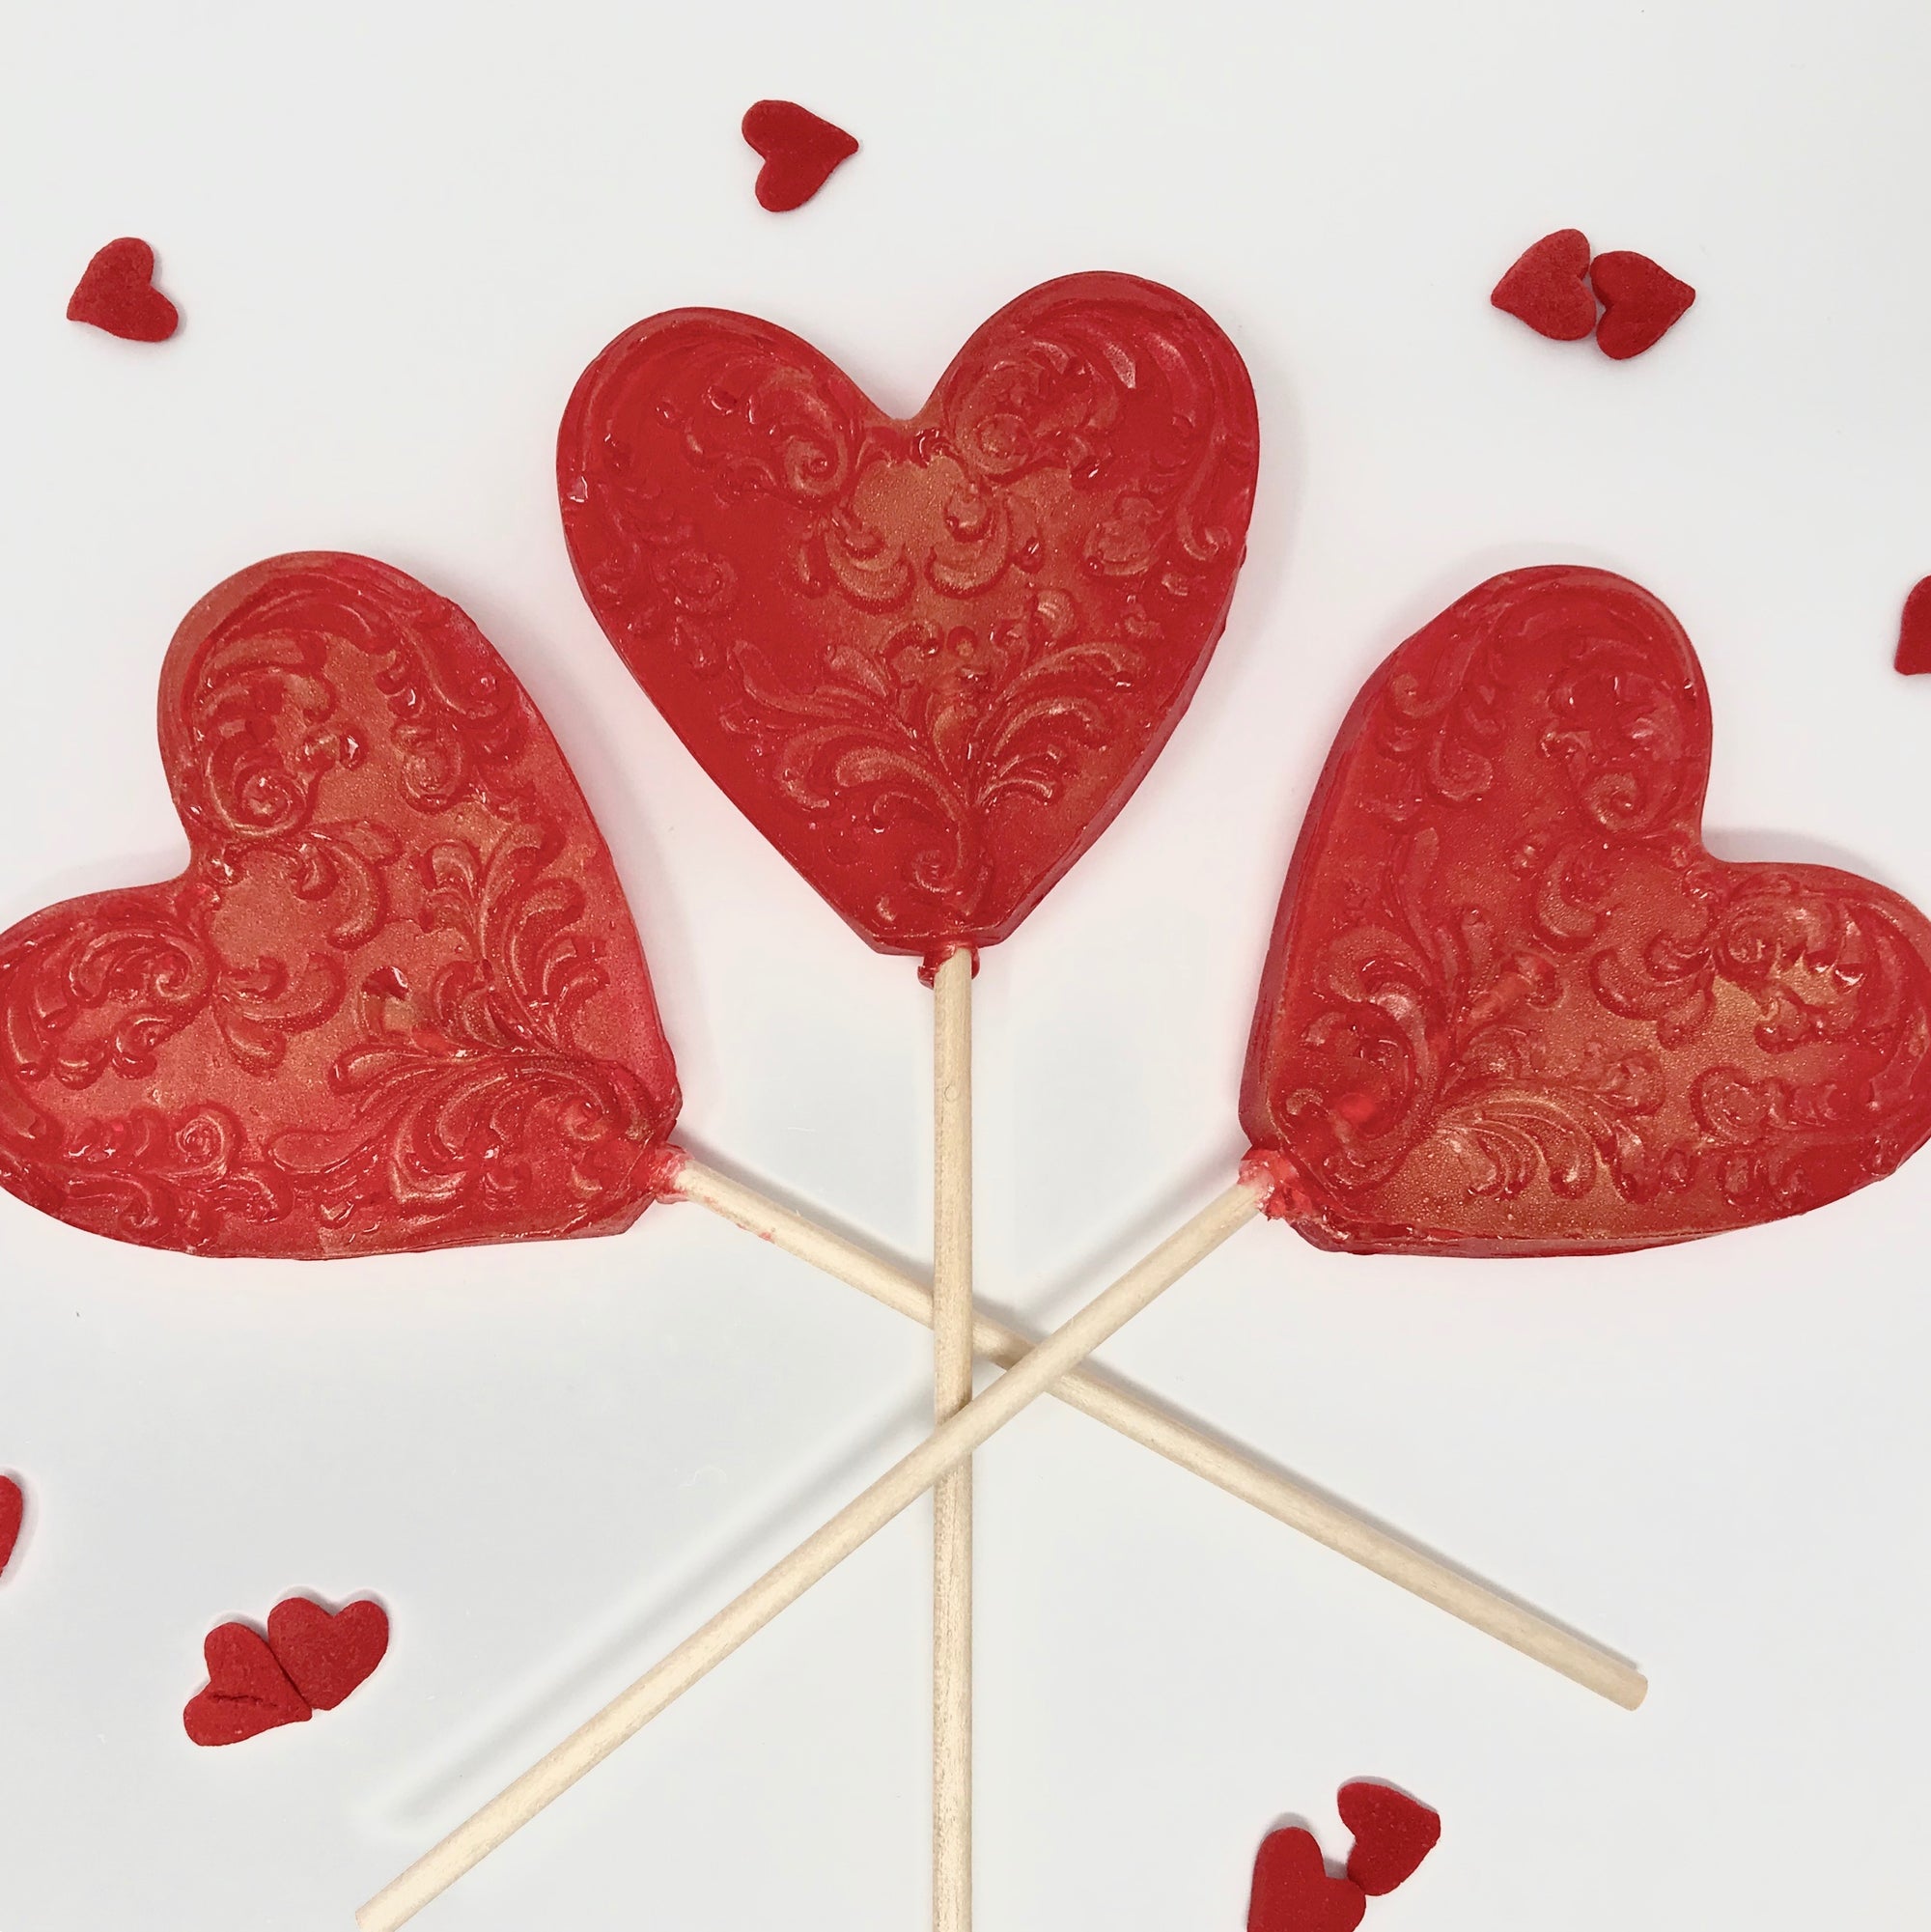 Filigree Heart Lollipops 3-piece set by I Want Candy!